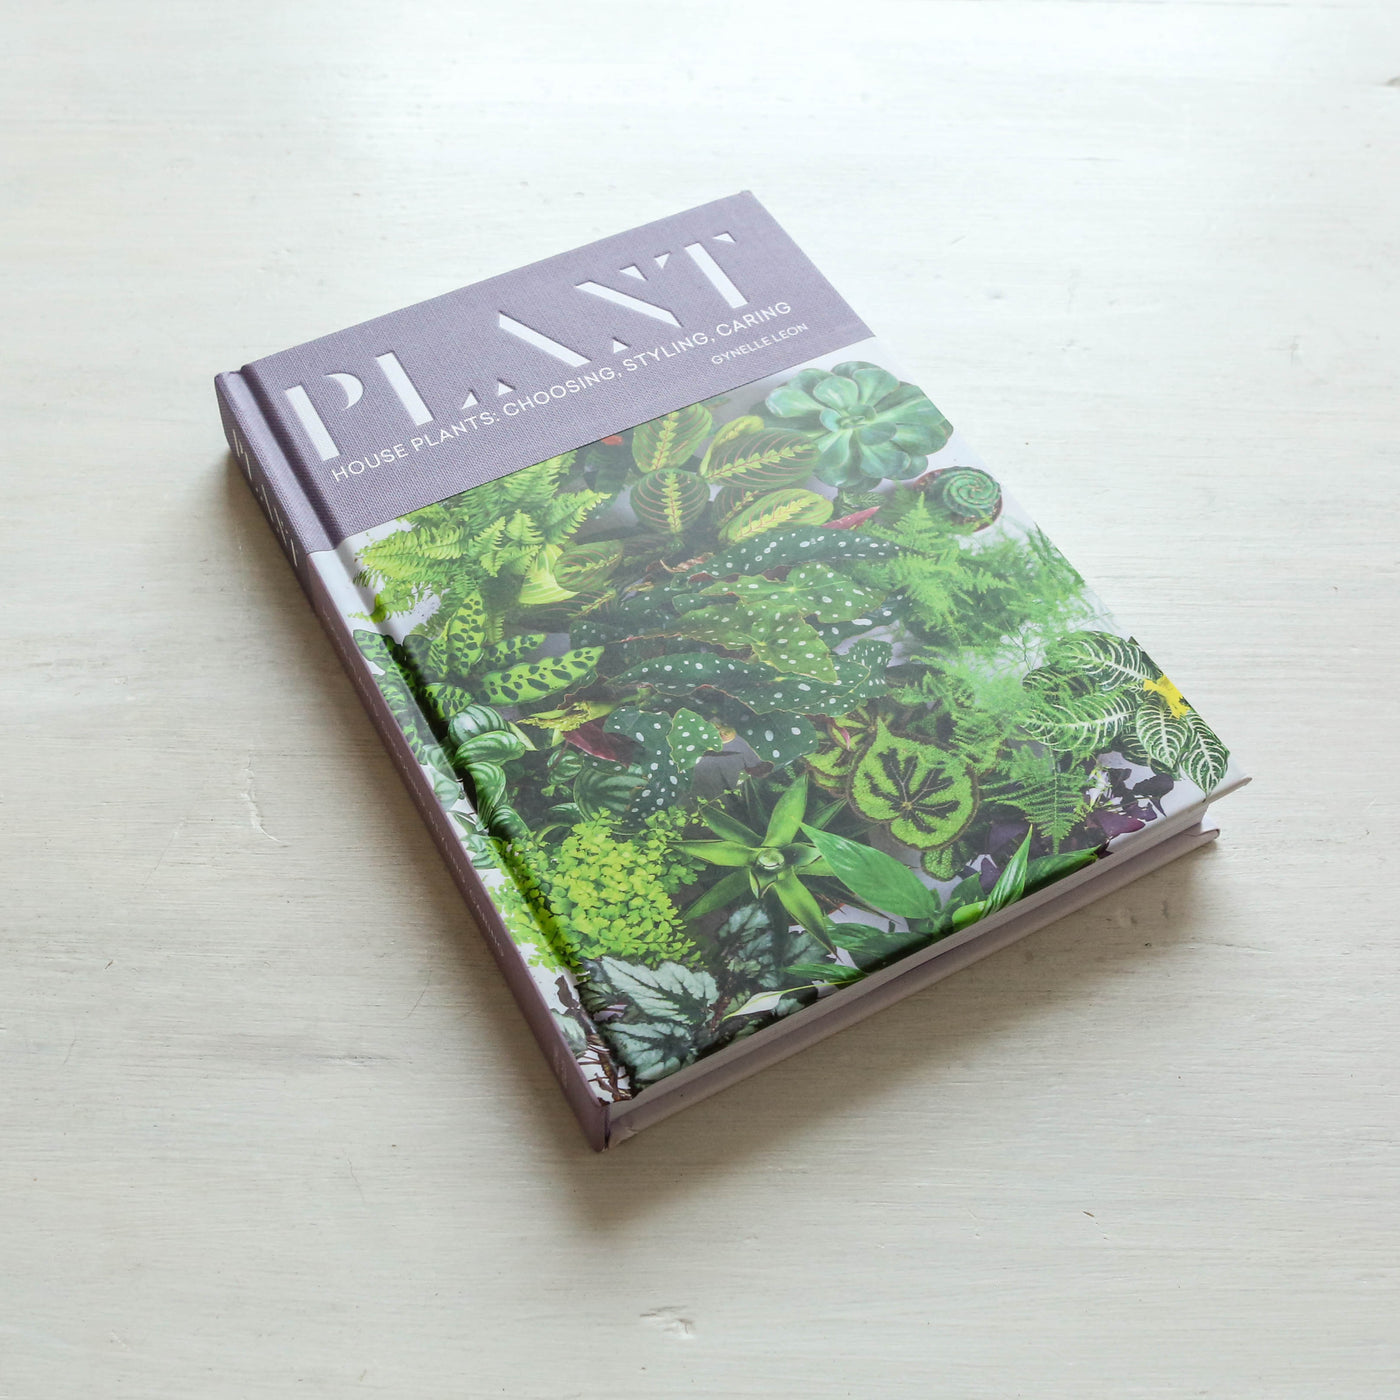 Plant : House plants: choosing, styling, caring